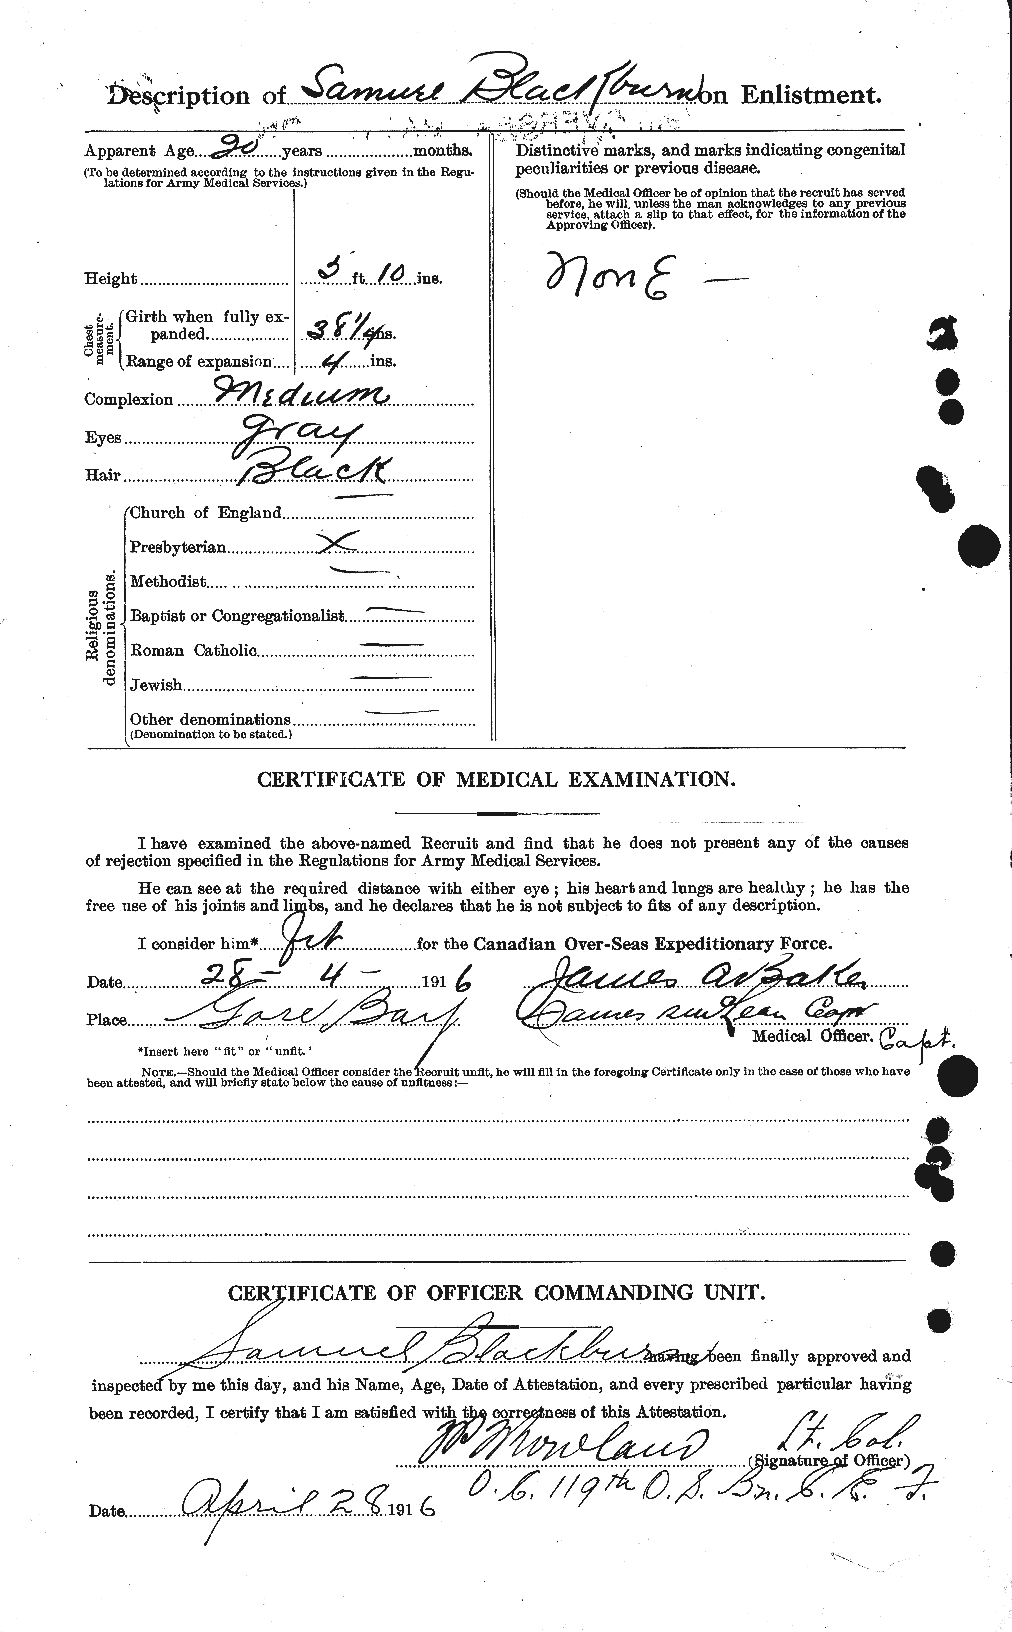 Personnel Records of the First World War - CEF 246421b